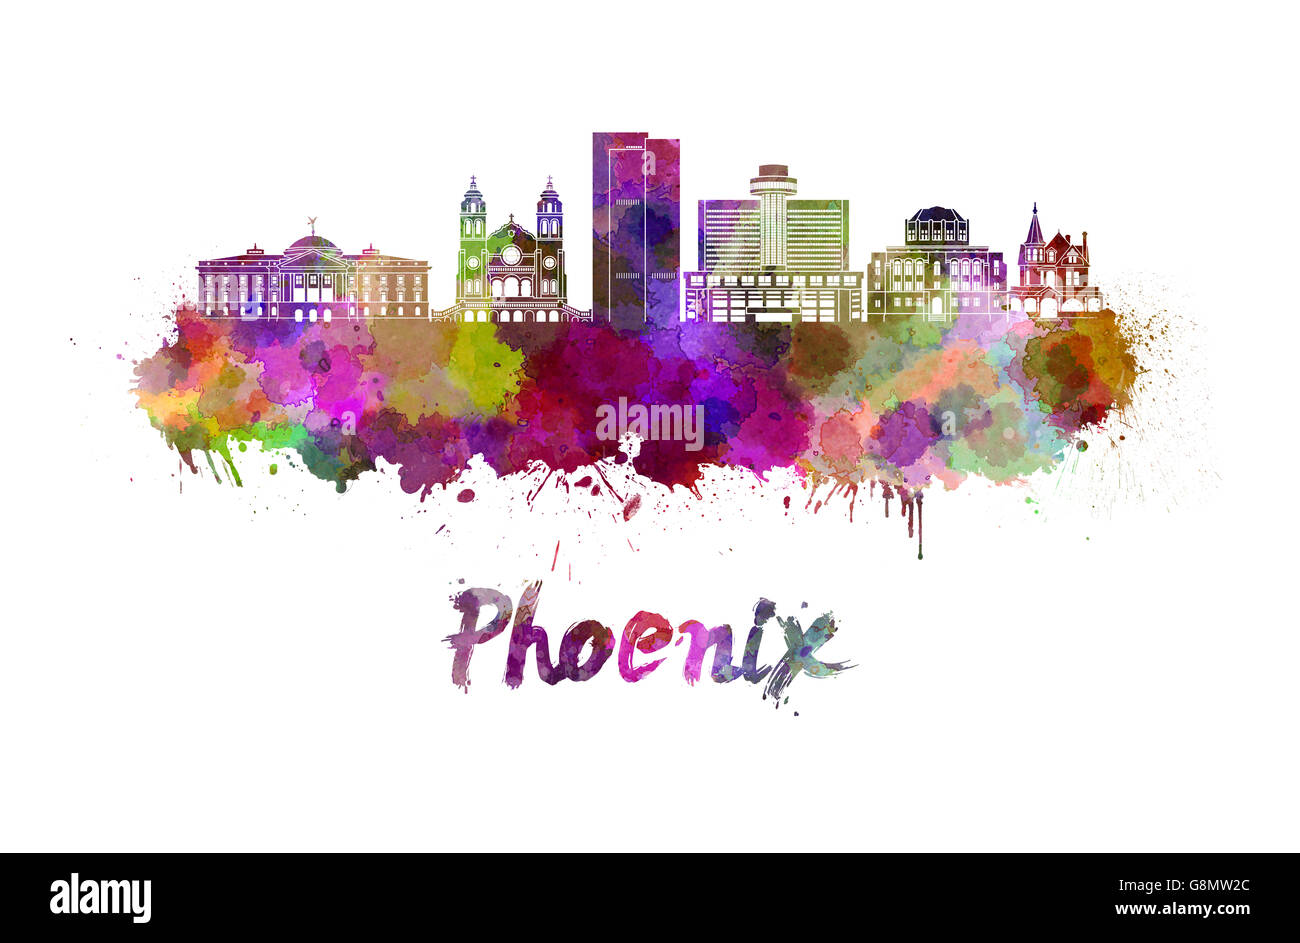 Phoenix skyline in watercolor splatters with clipping path Stock Photo